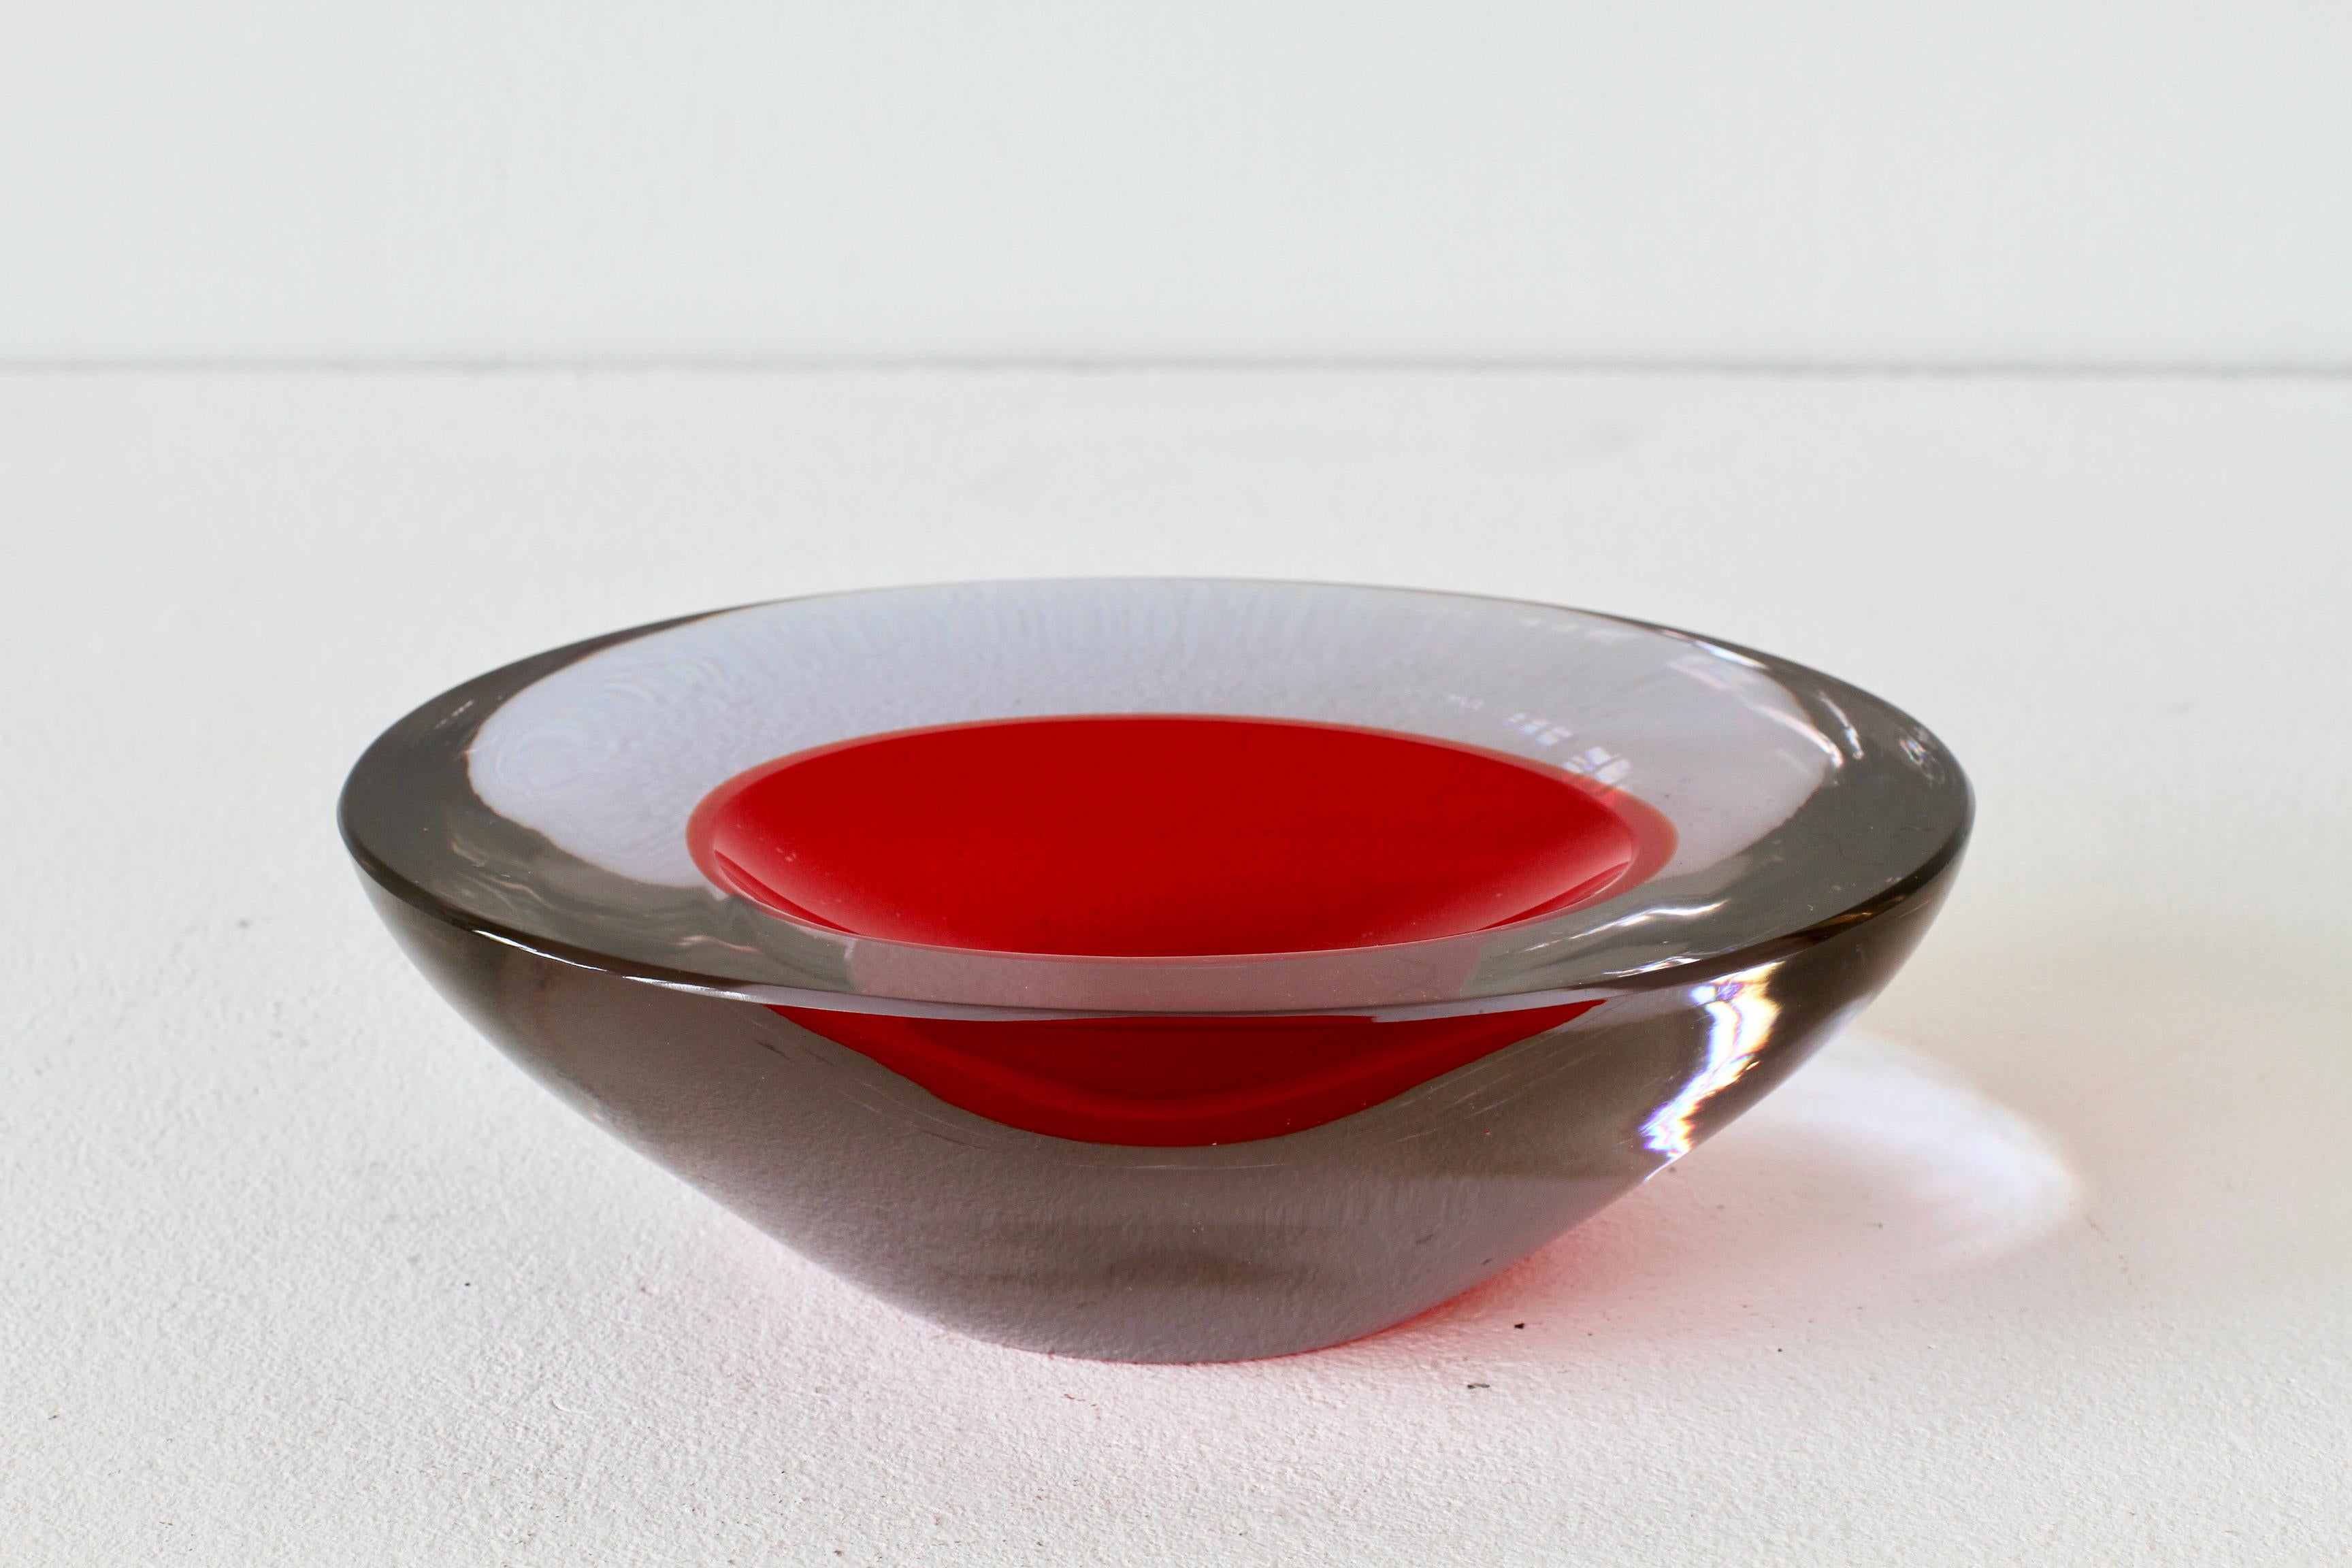 Antonio da Ros for Cenedese large and heavy vintage Italian Murano oval shaped glass bowl, serving dish or ashtray, circa 1965-1975. Utilizing the Sommerso technique this large, heavy piece of glass features an asymmetric design captured in ruby red